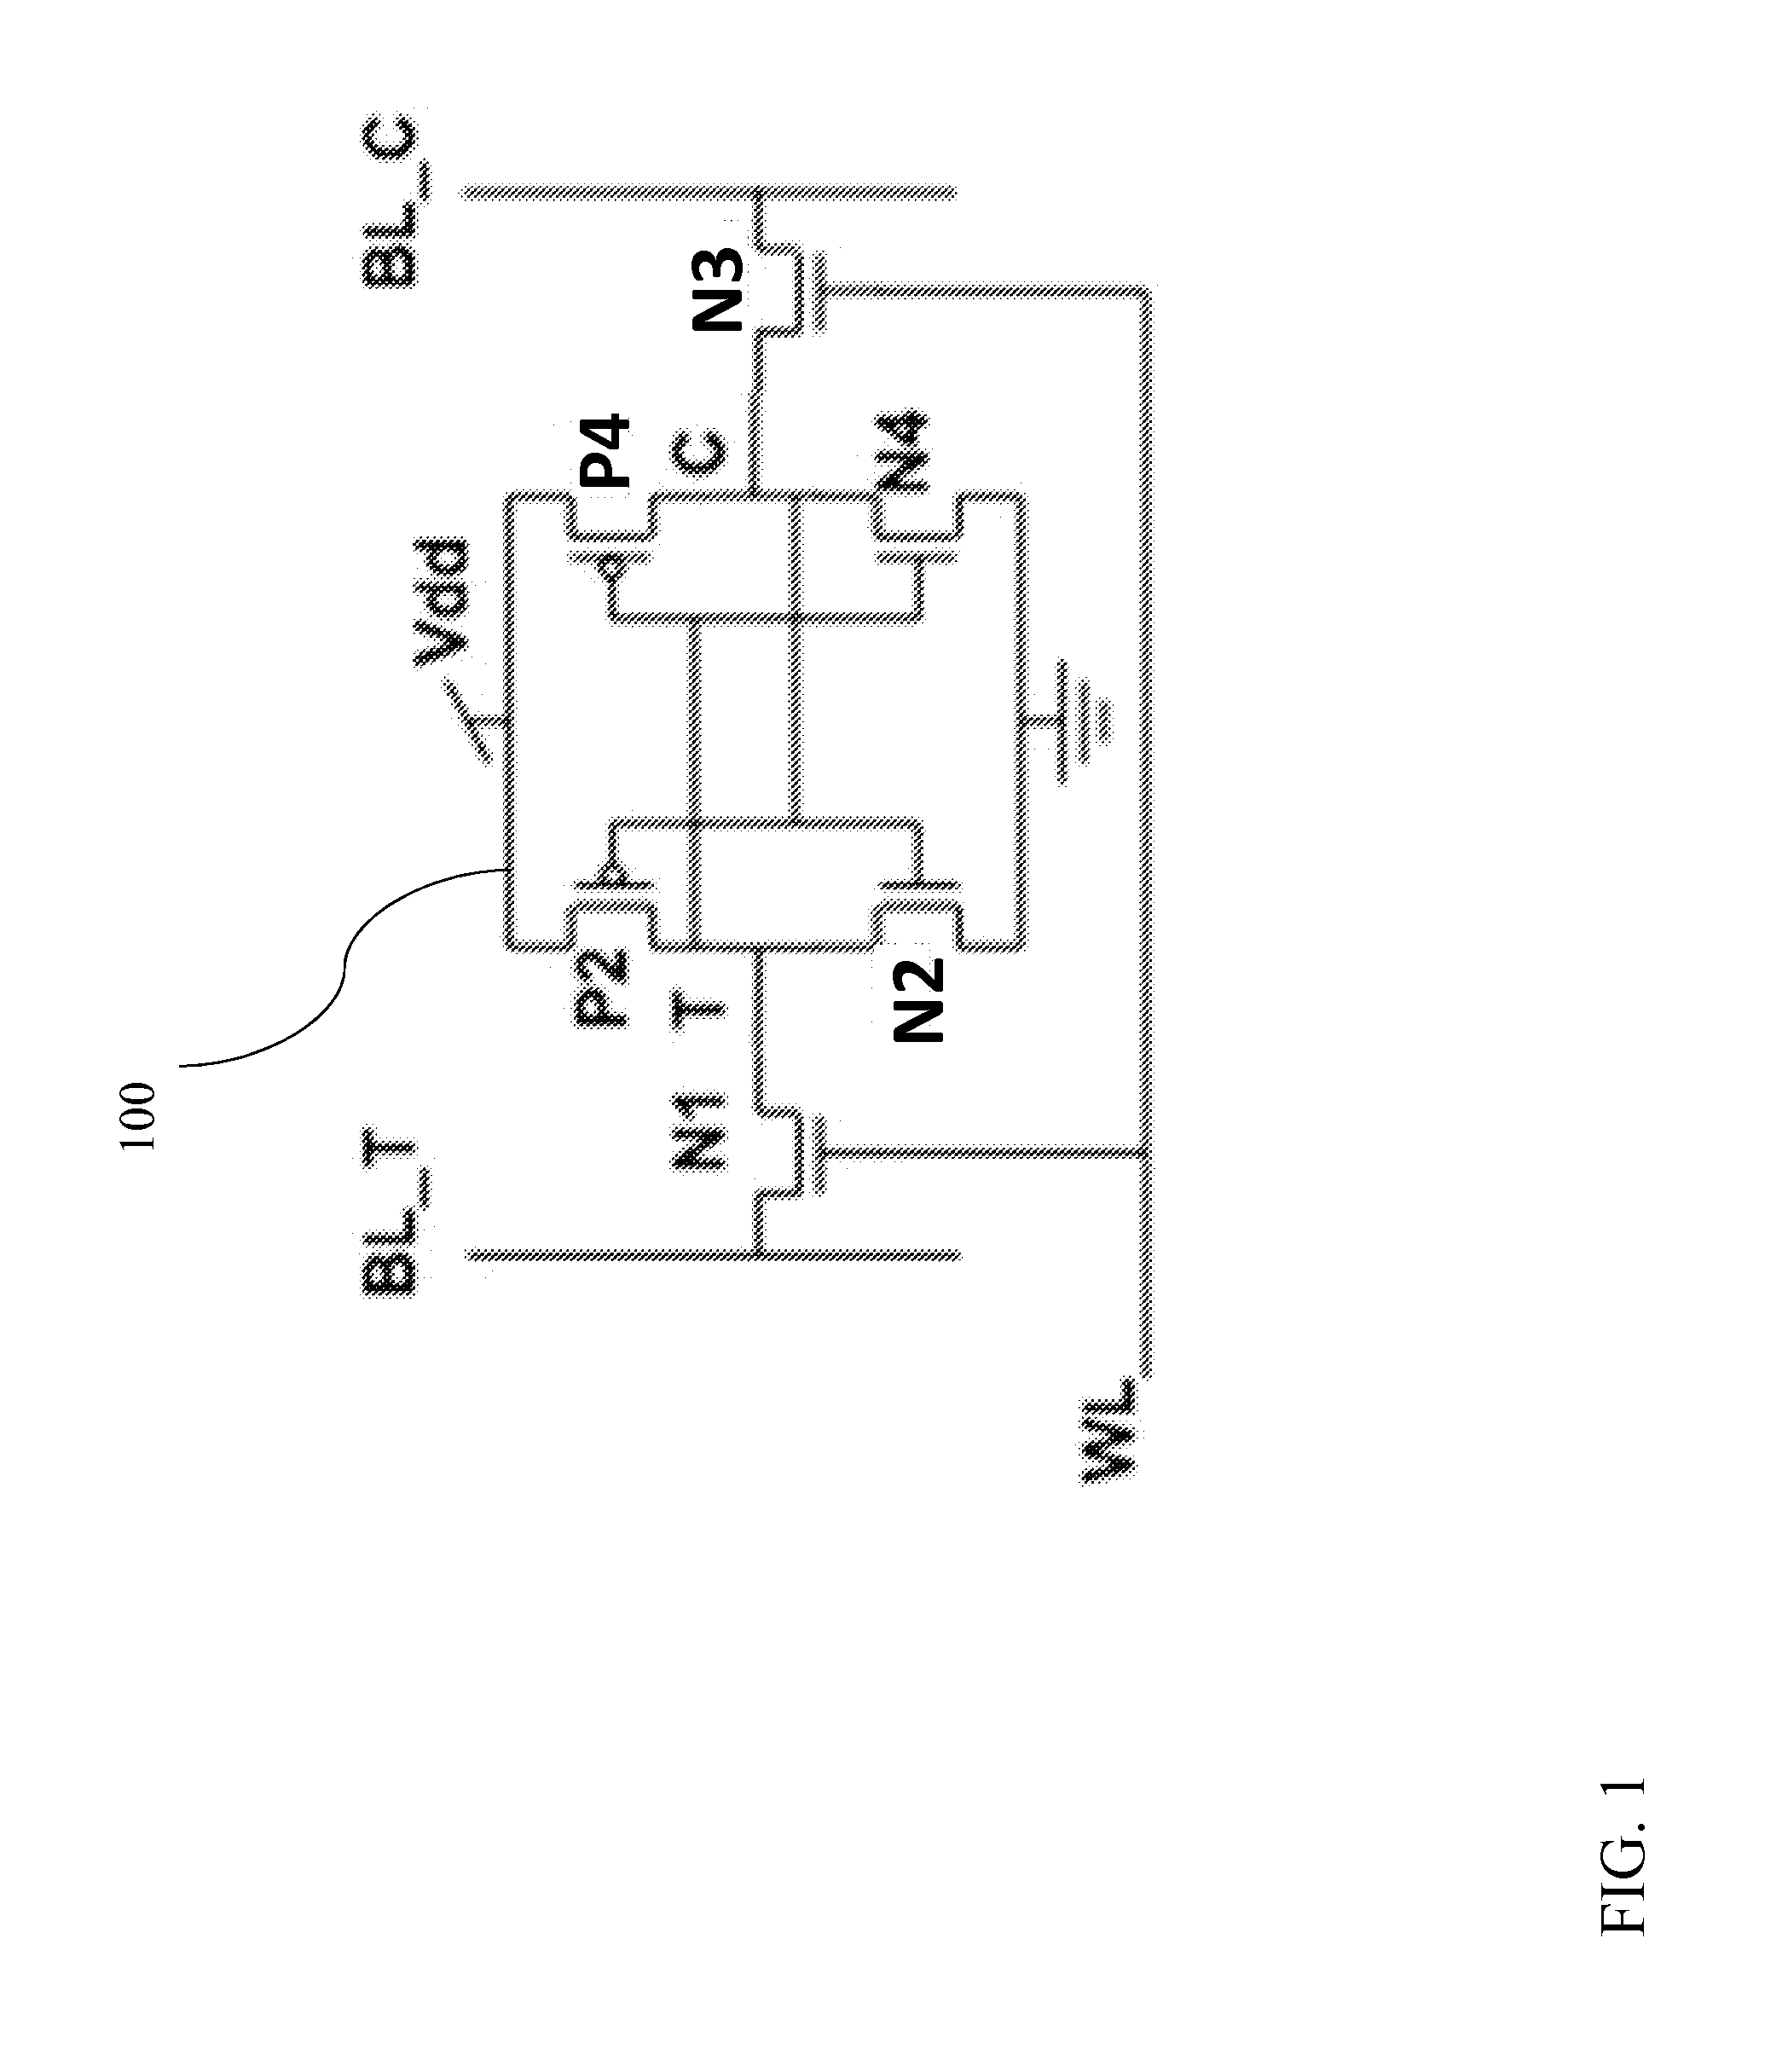 Methods and circuits for generating physically unclonable function